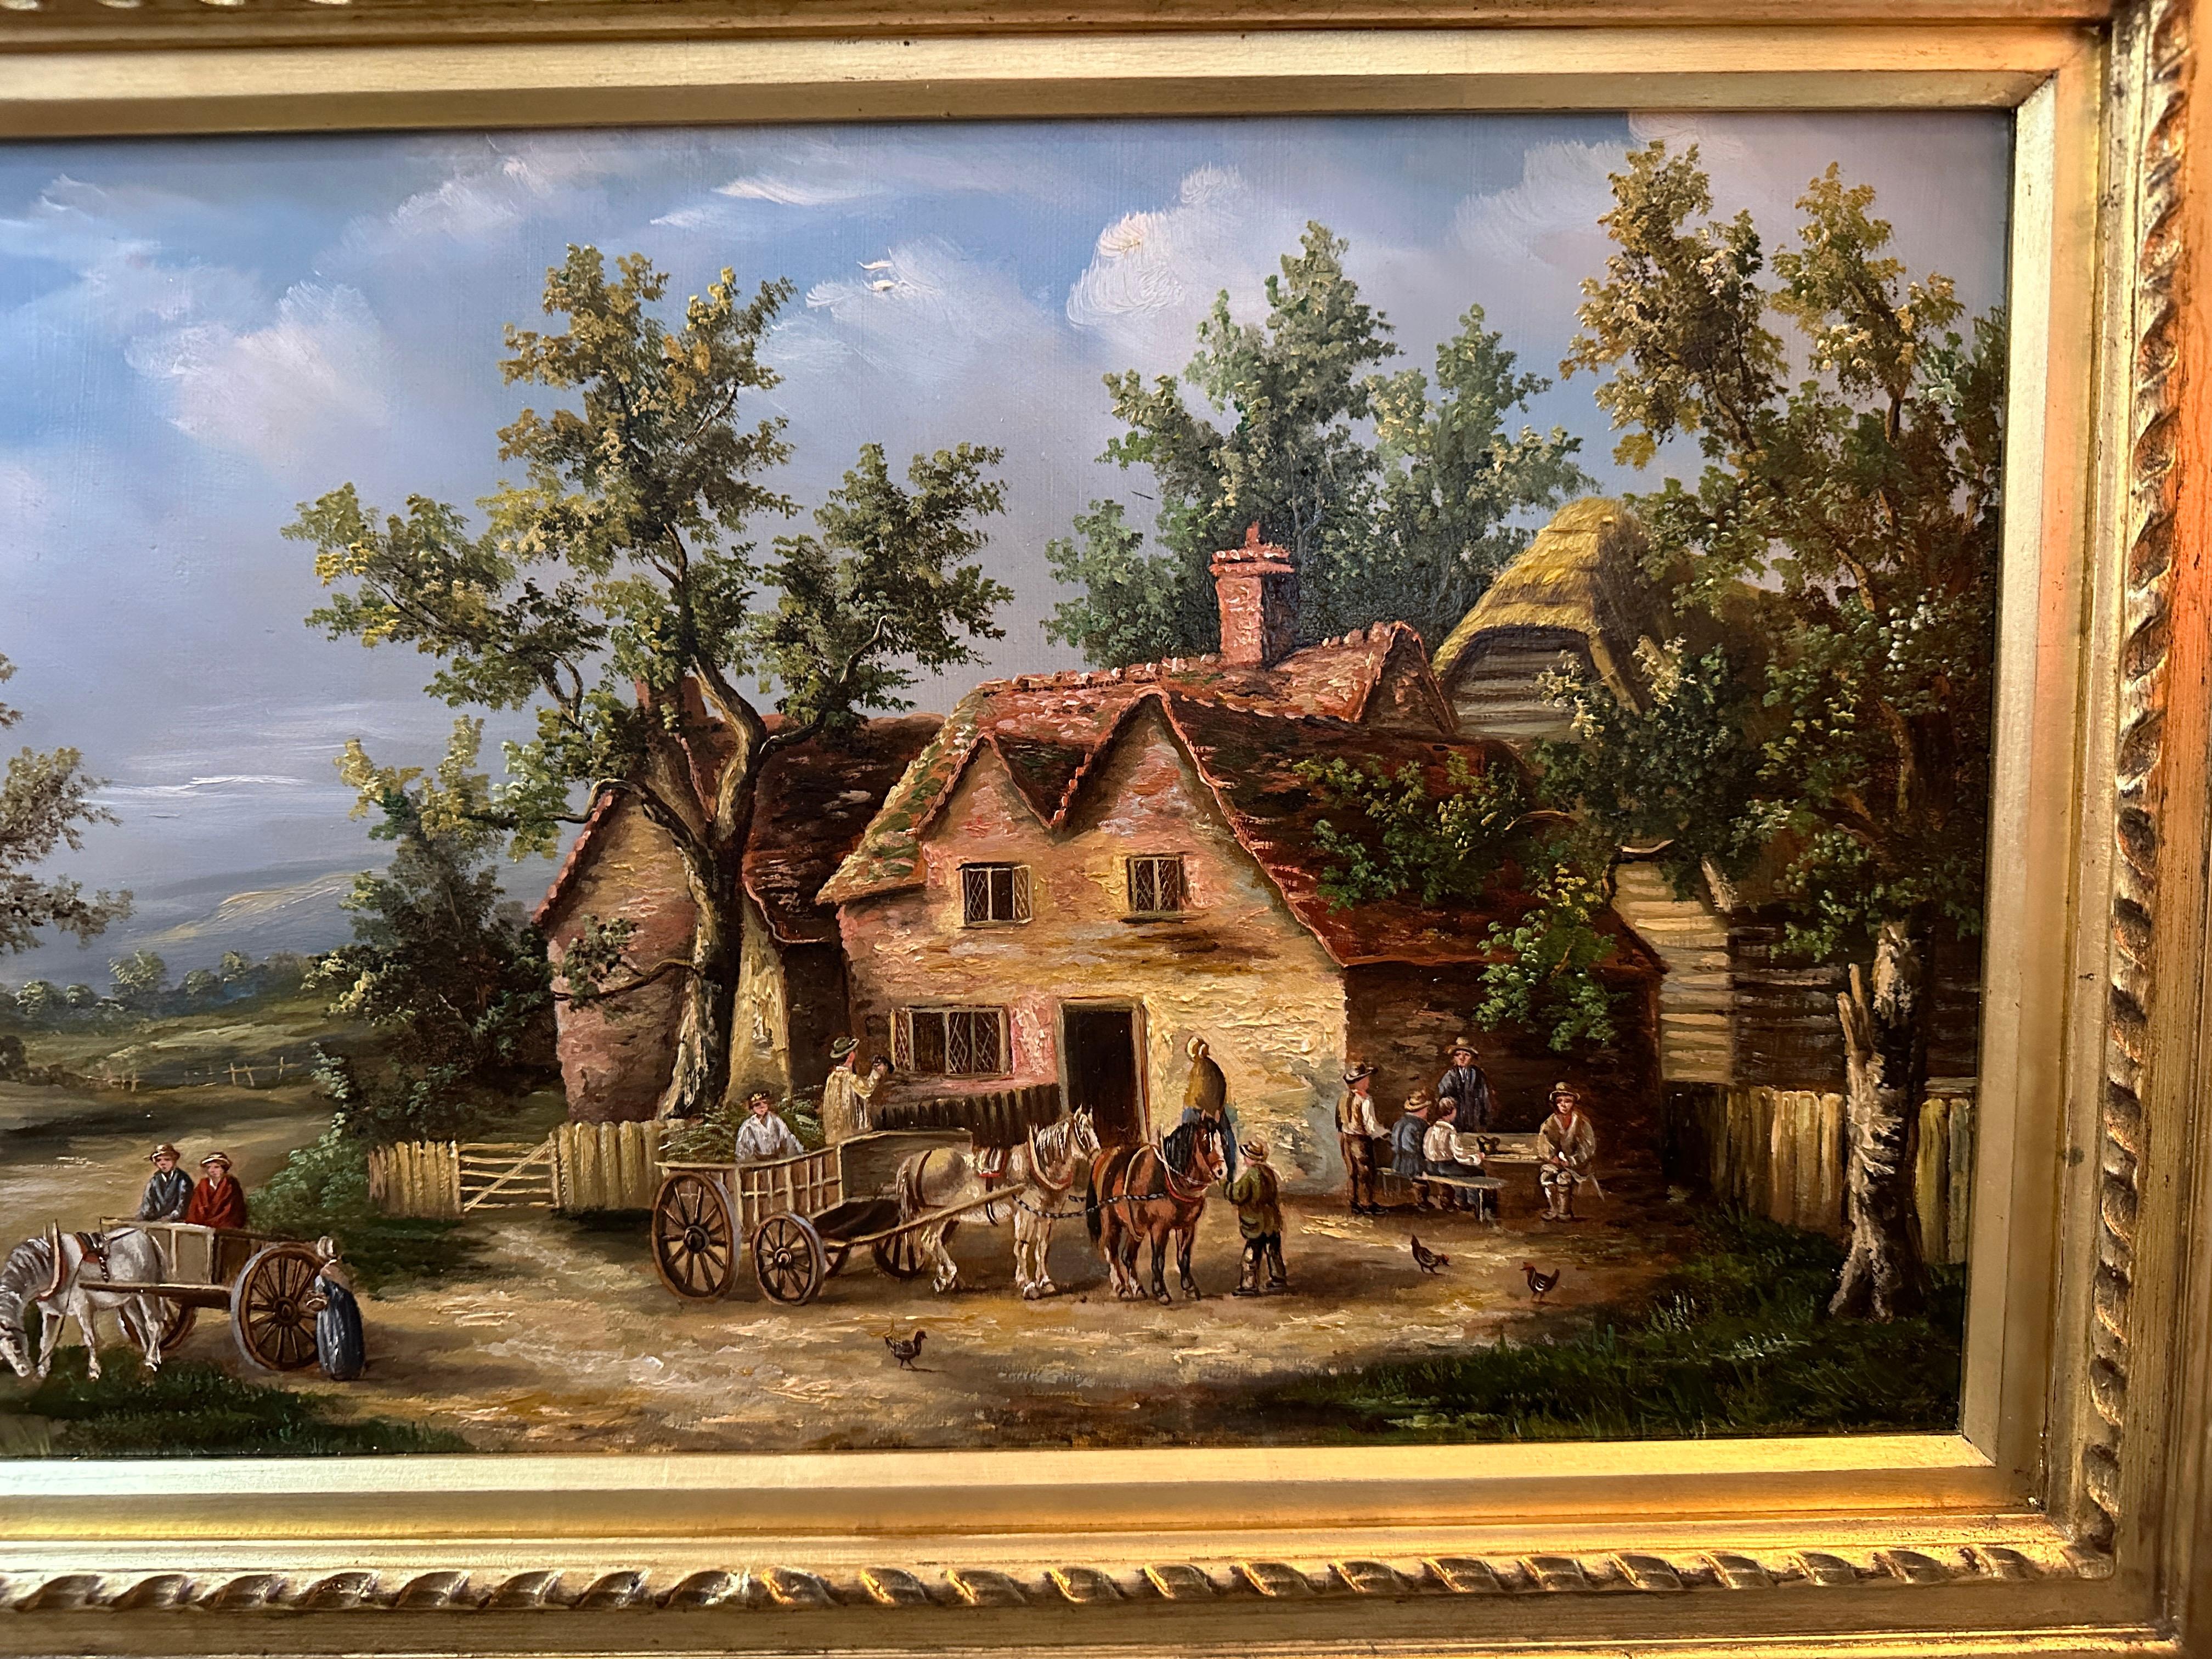 19th century English village scene with cottages, horses landscape and people - Painting by Georgina Lara